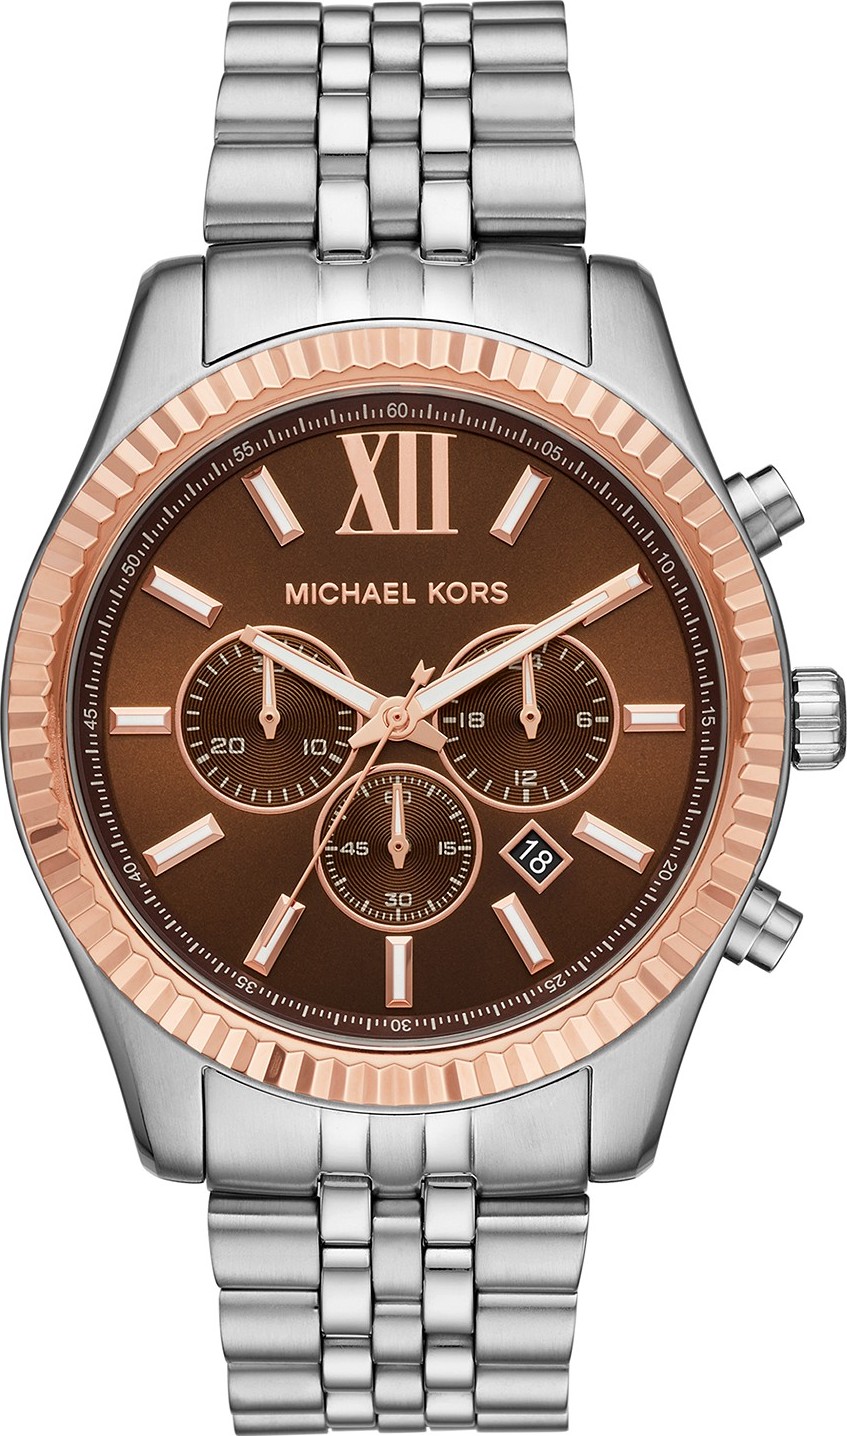 Michael Kors Lexington Chronograph Stainless Steel Watch  Shopping From USA